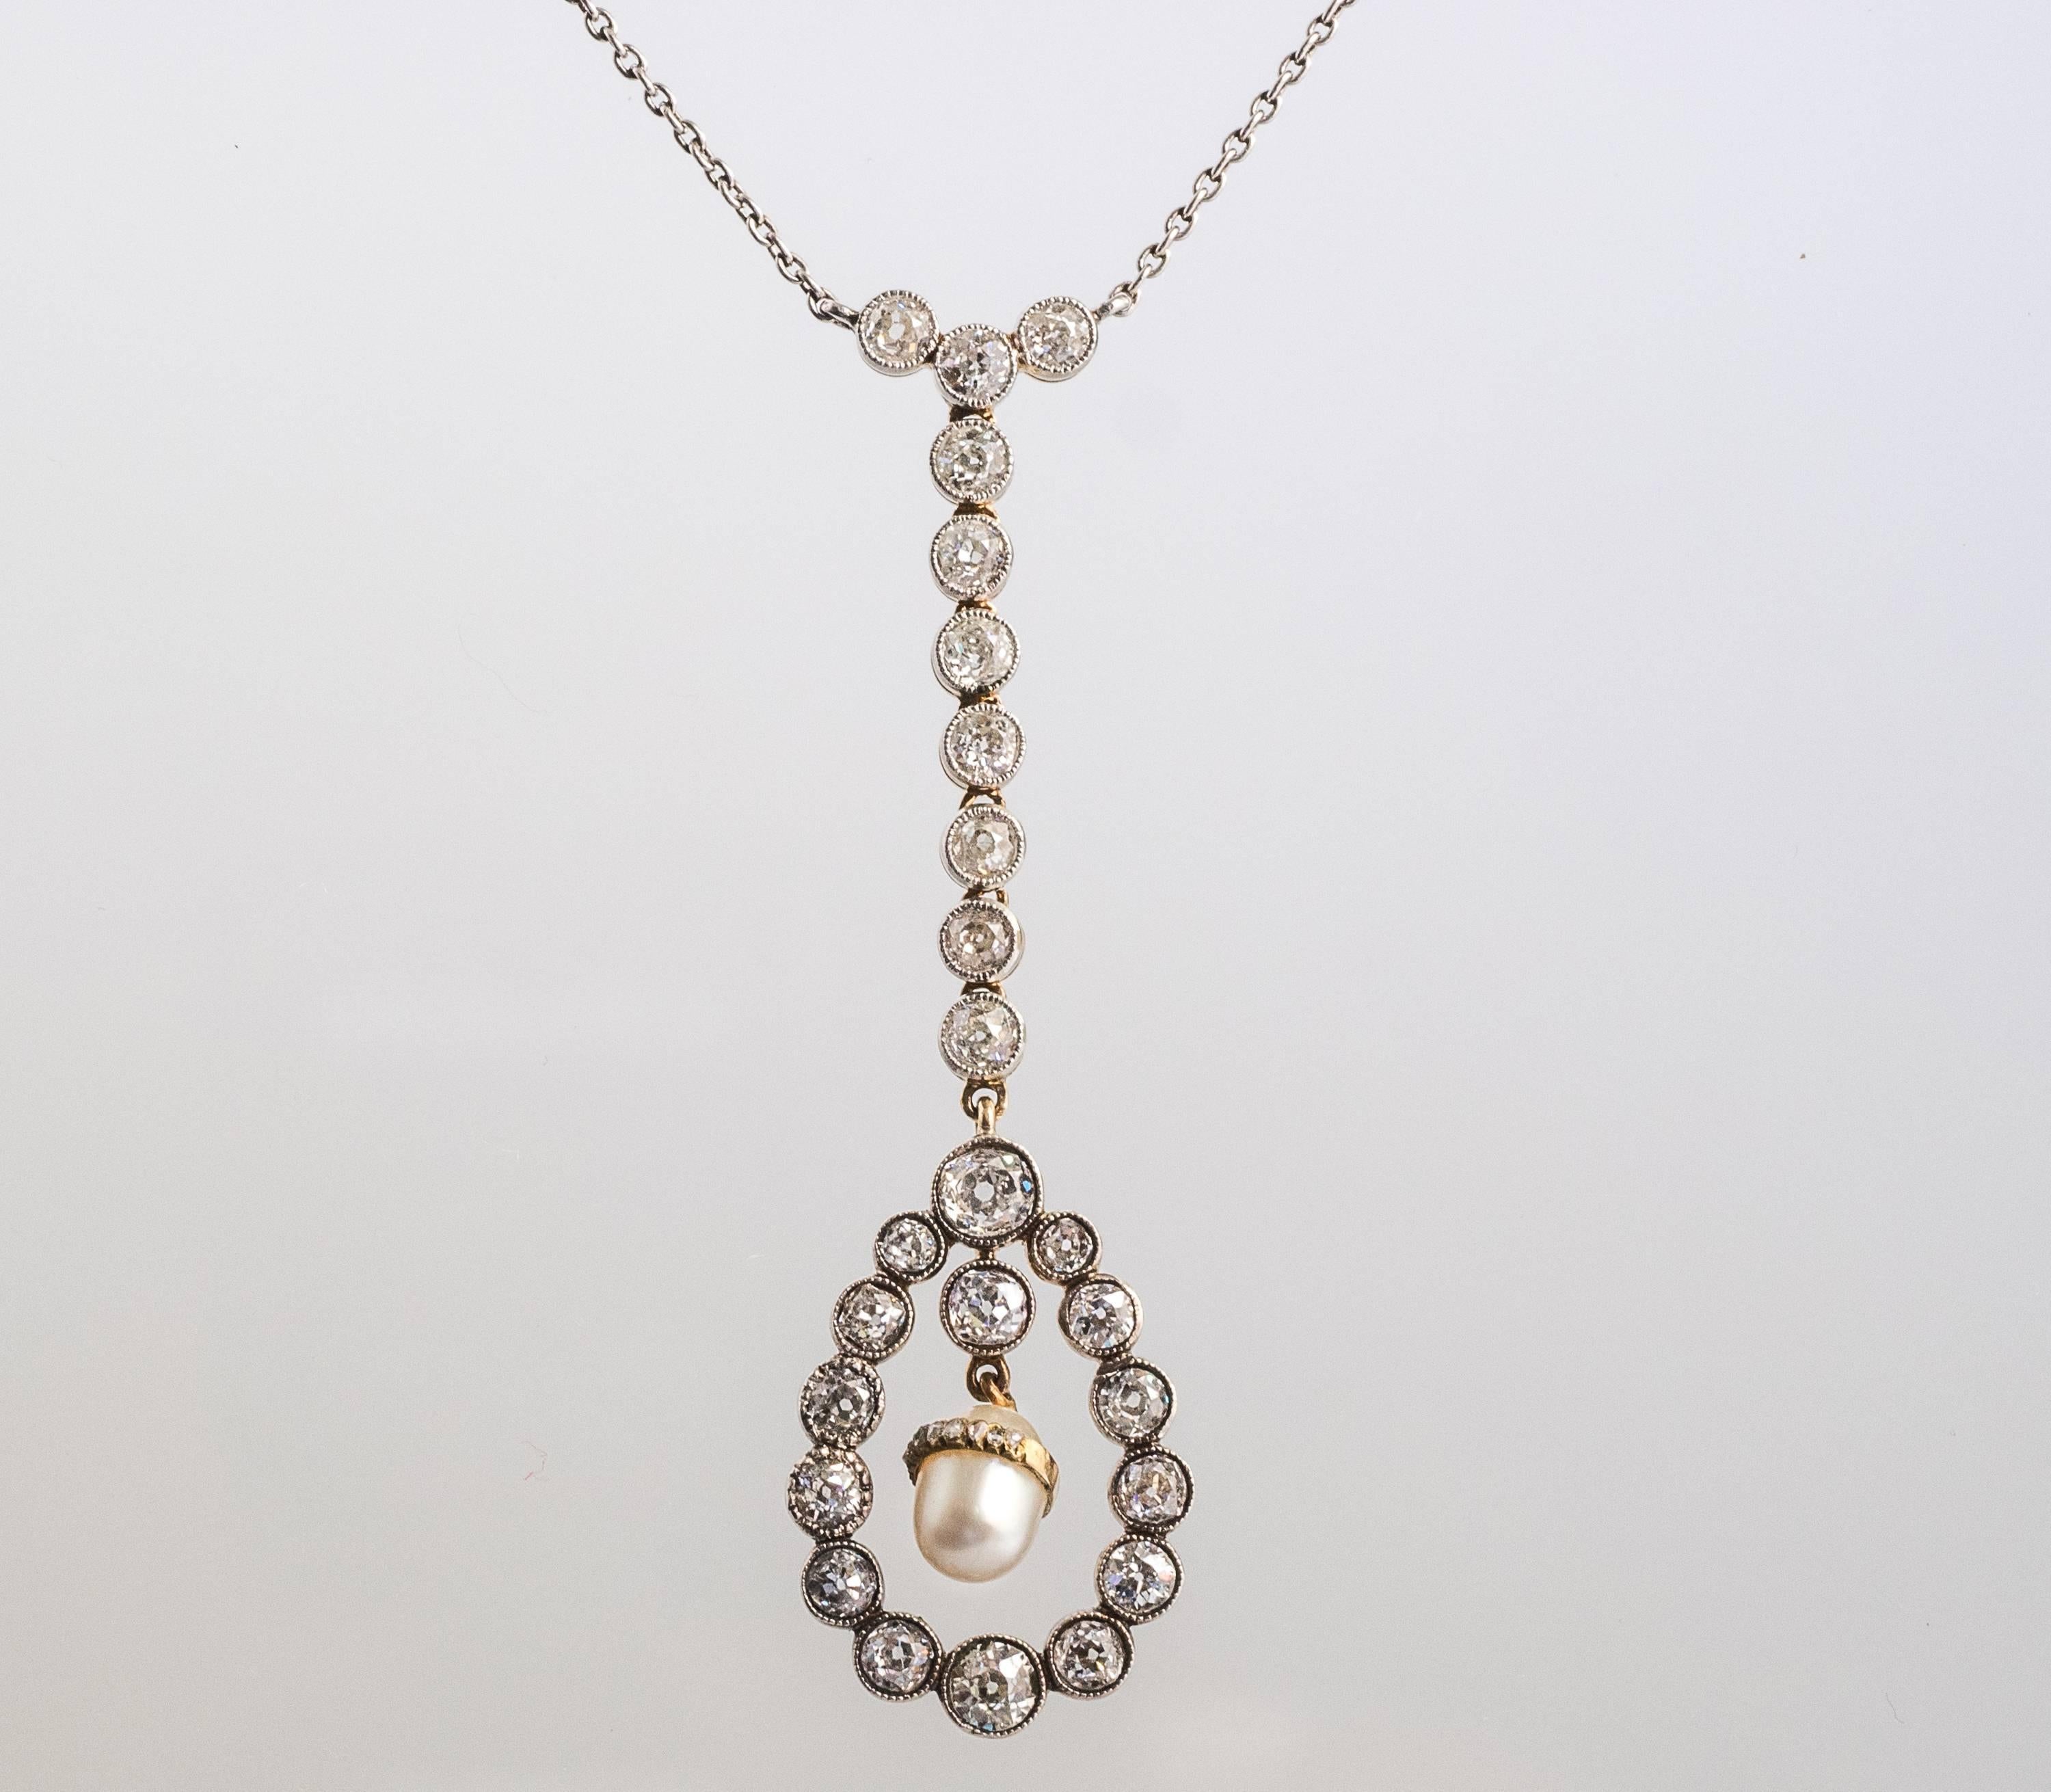 Art Deco Diamond Pearl and 14 Karat Two-Tone Gold Drop Necklace. Very early Art Deco/Victorian necklace with old miner diamonds and an oval egg shaped pearl. All diamonds on the drop are old mine cuts and range from G-I Color and VS-SI clarity. The